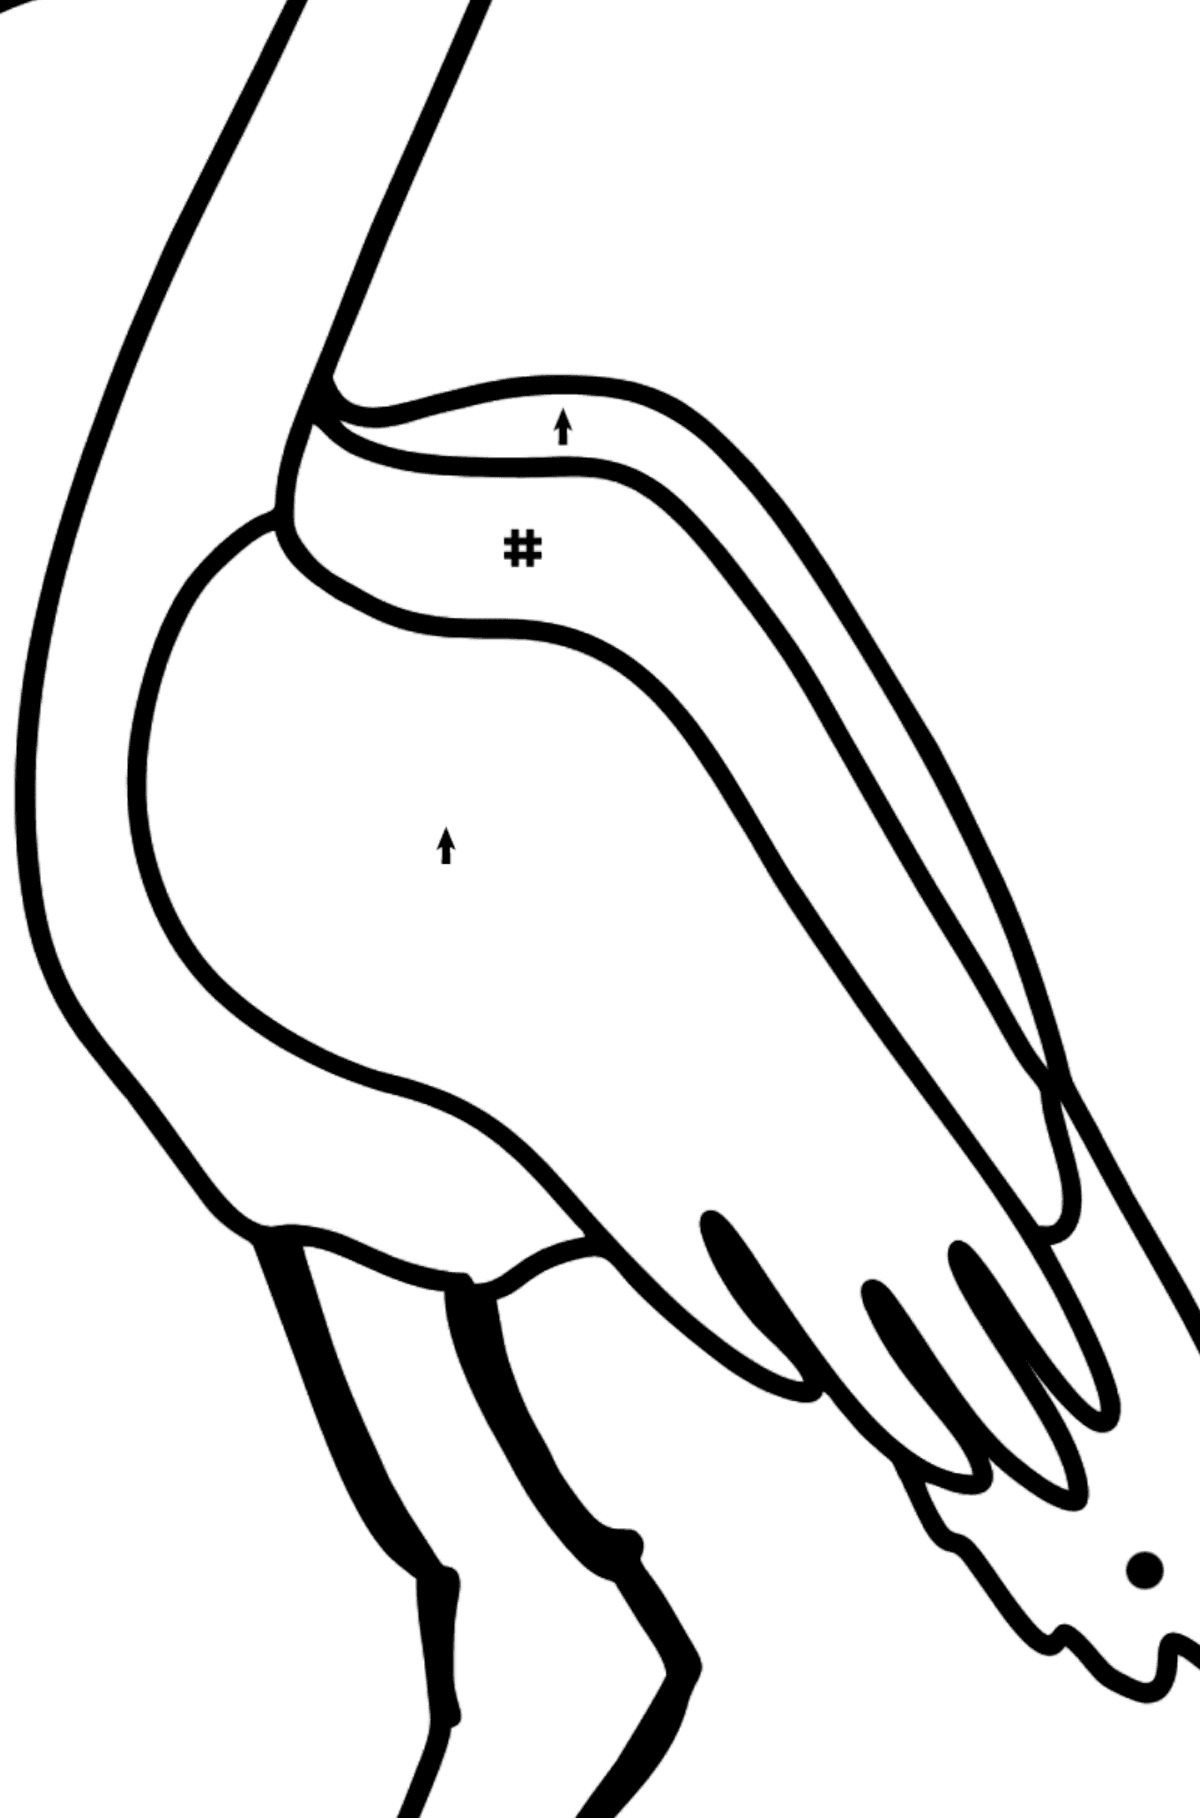 Simple coloring page with a stork  - Coloring by Symbols for Kids